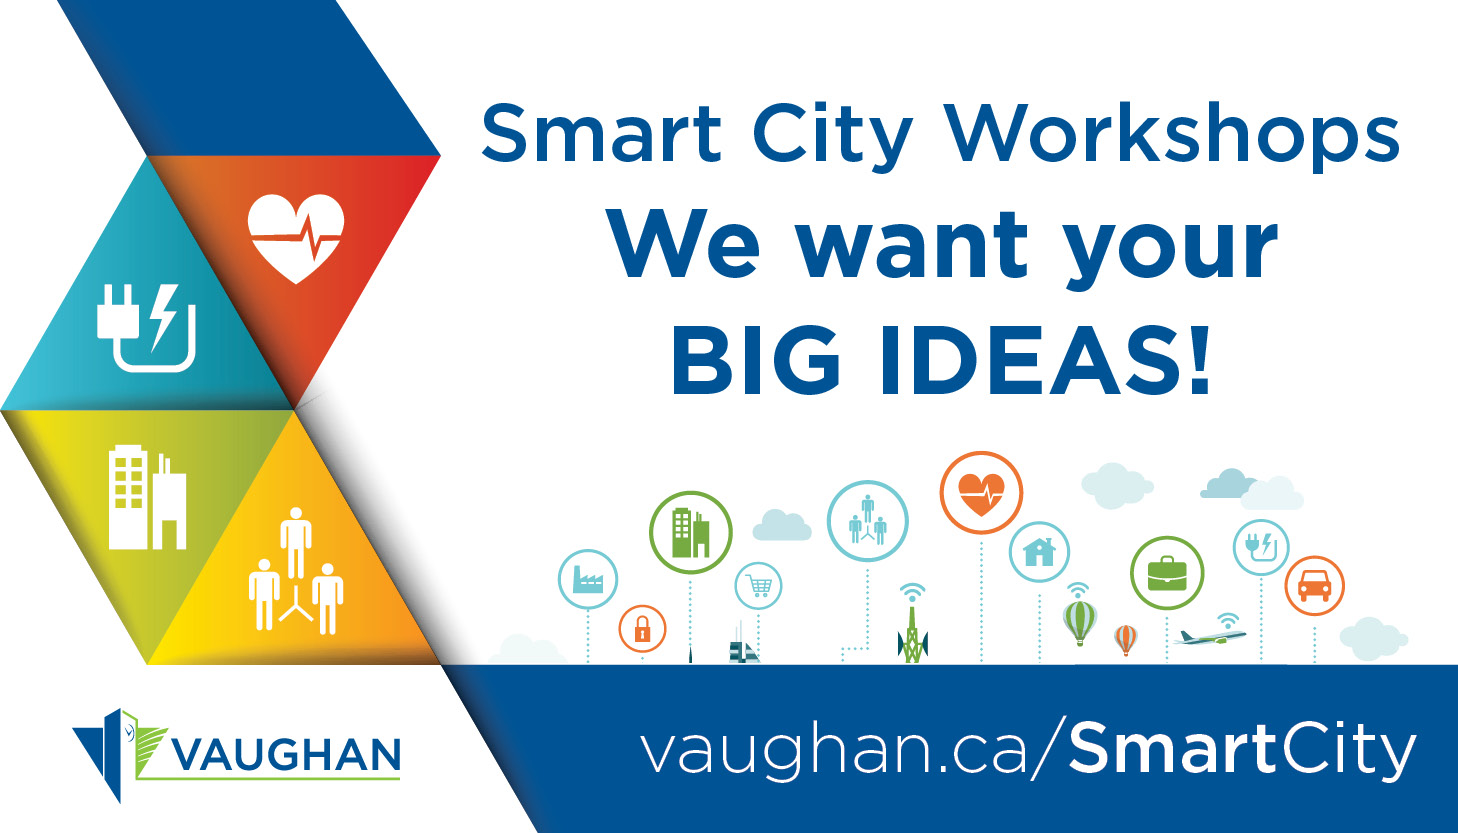 Are YOU full of great ideas? YOU could help Vaughan win up to $10 MILLION!